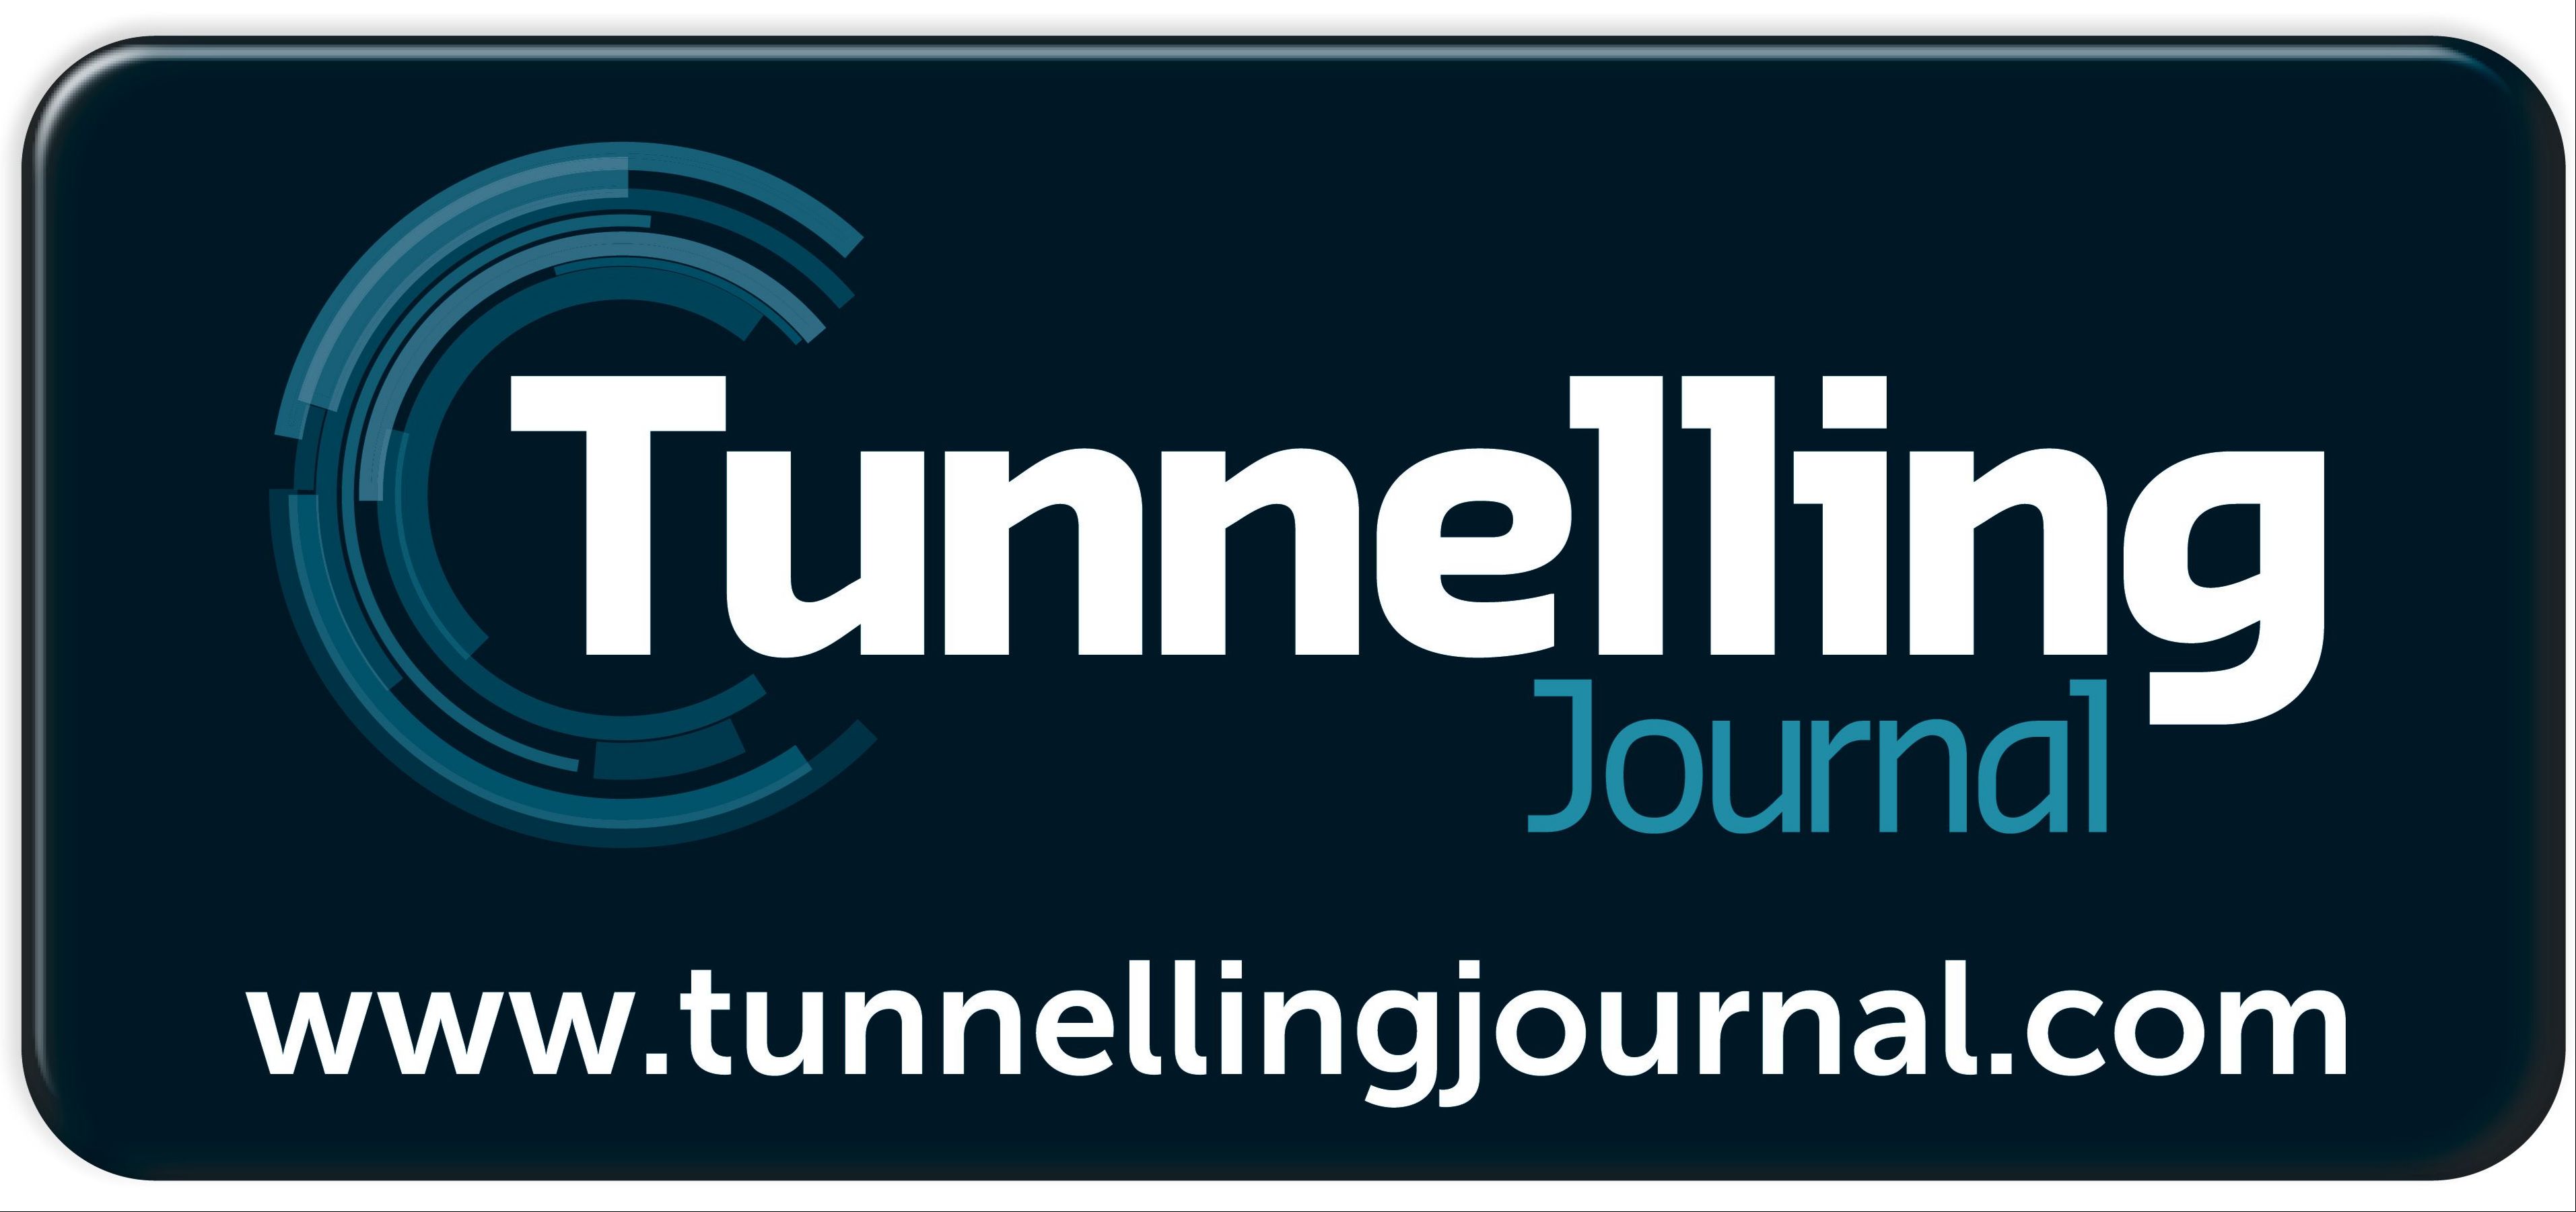 Tunnelling Journal